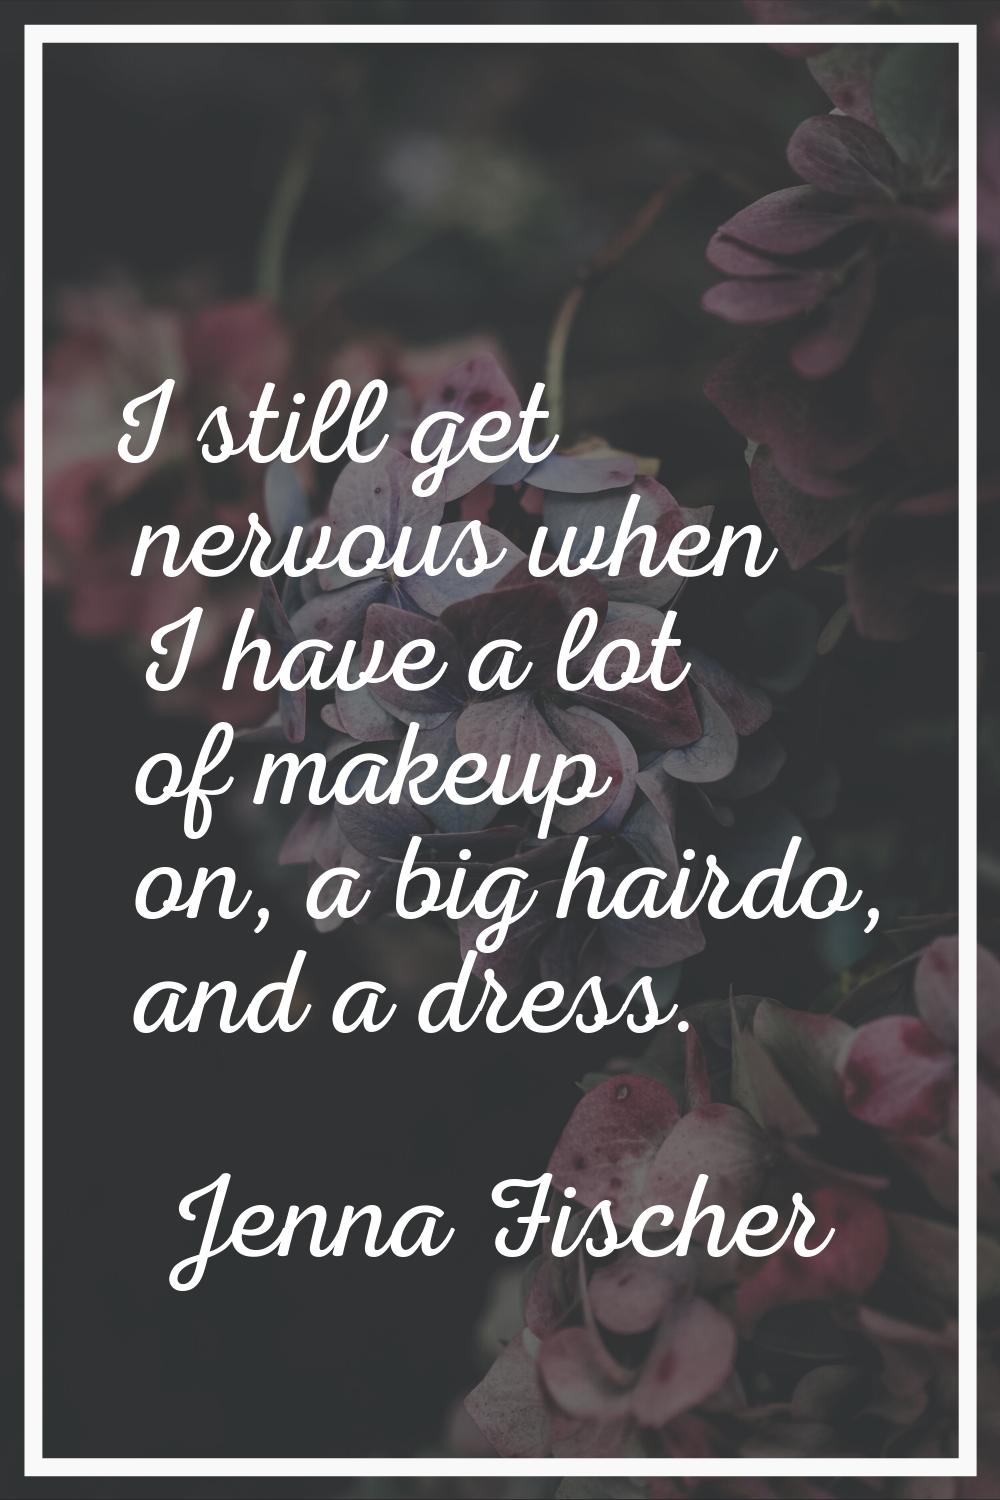 I still get nervous when I have a lot of makeup on, a big hairdo, and a dress.